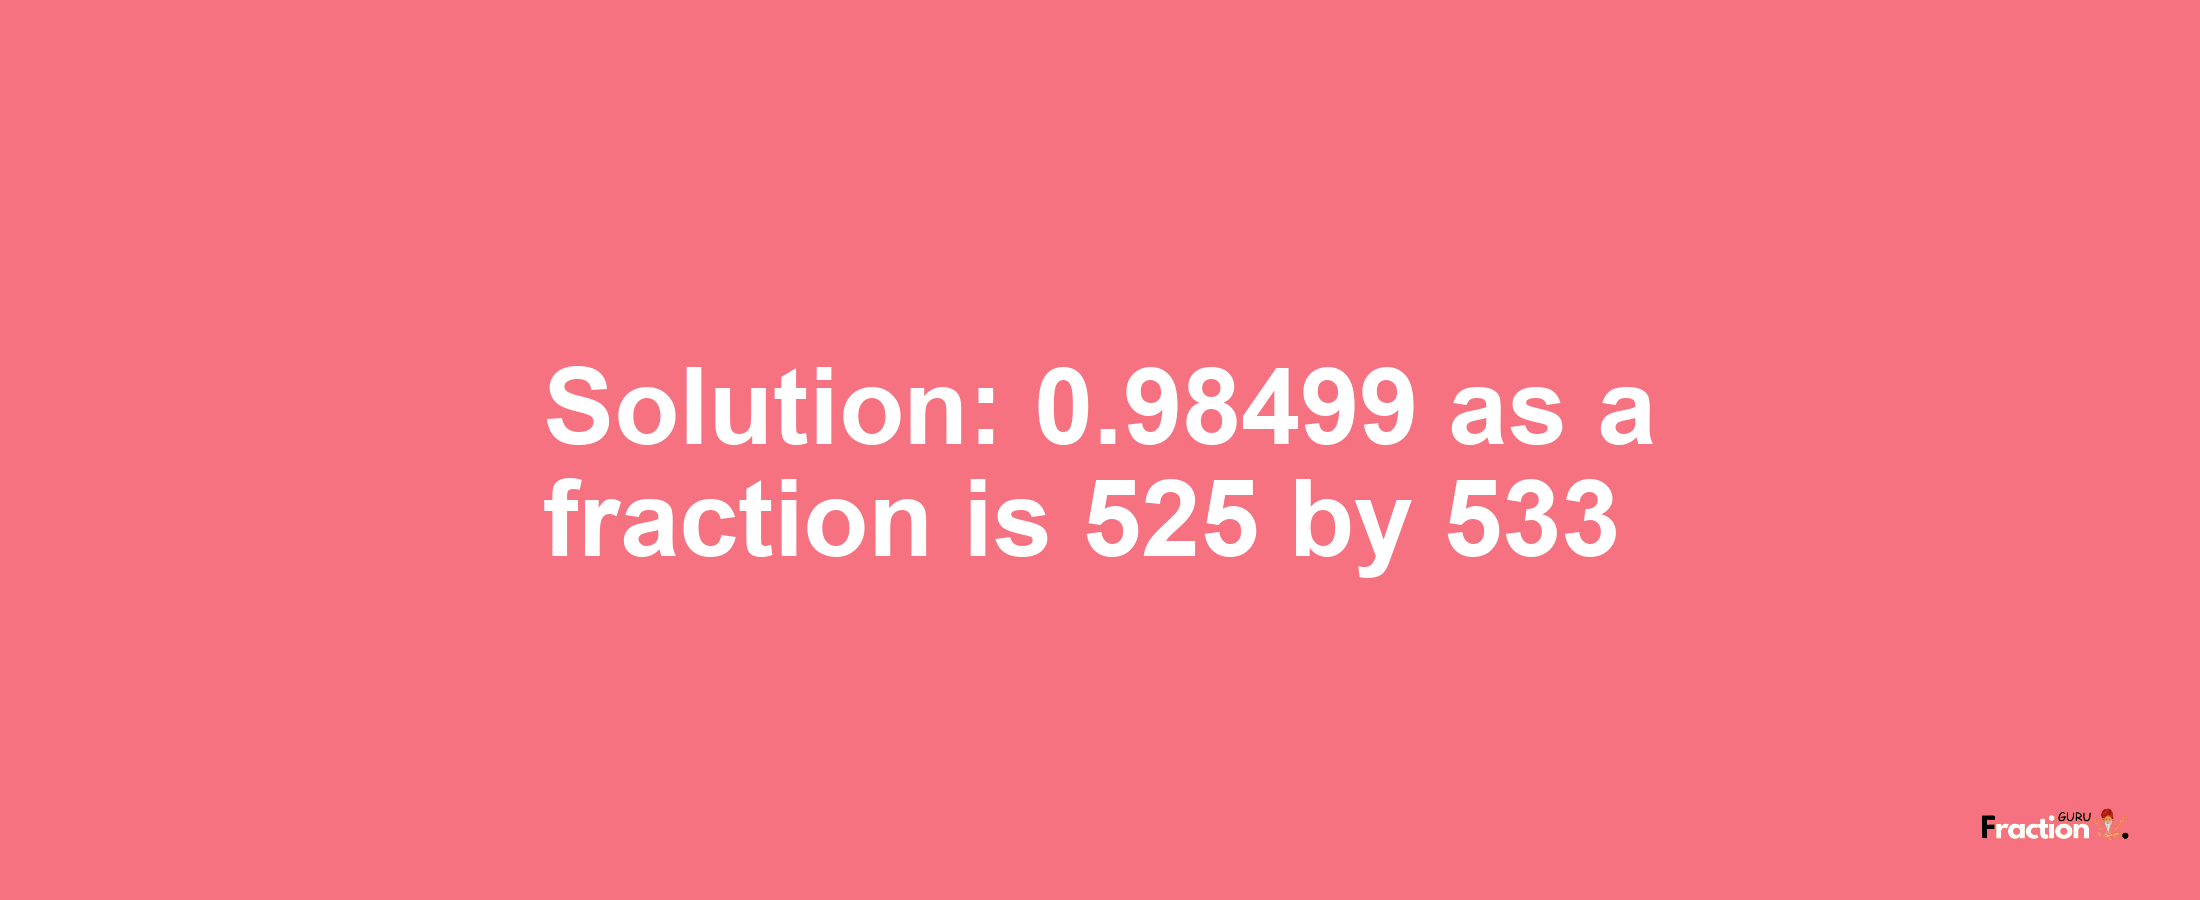 Solution:0.98499 as a fraction is 525/533